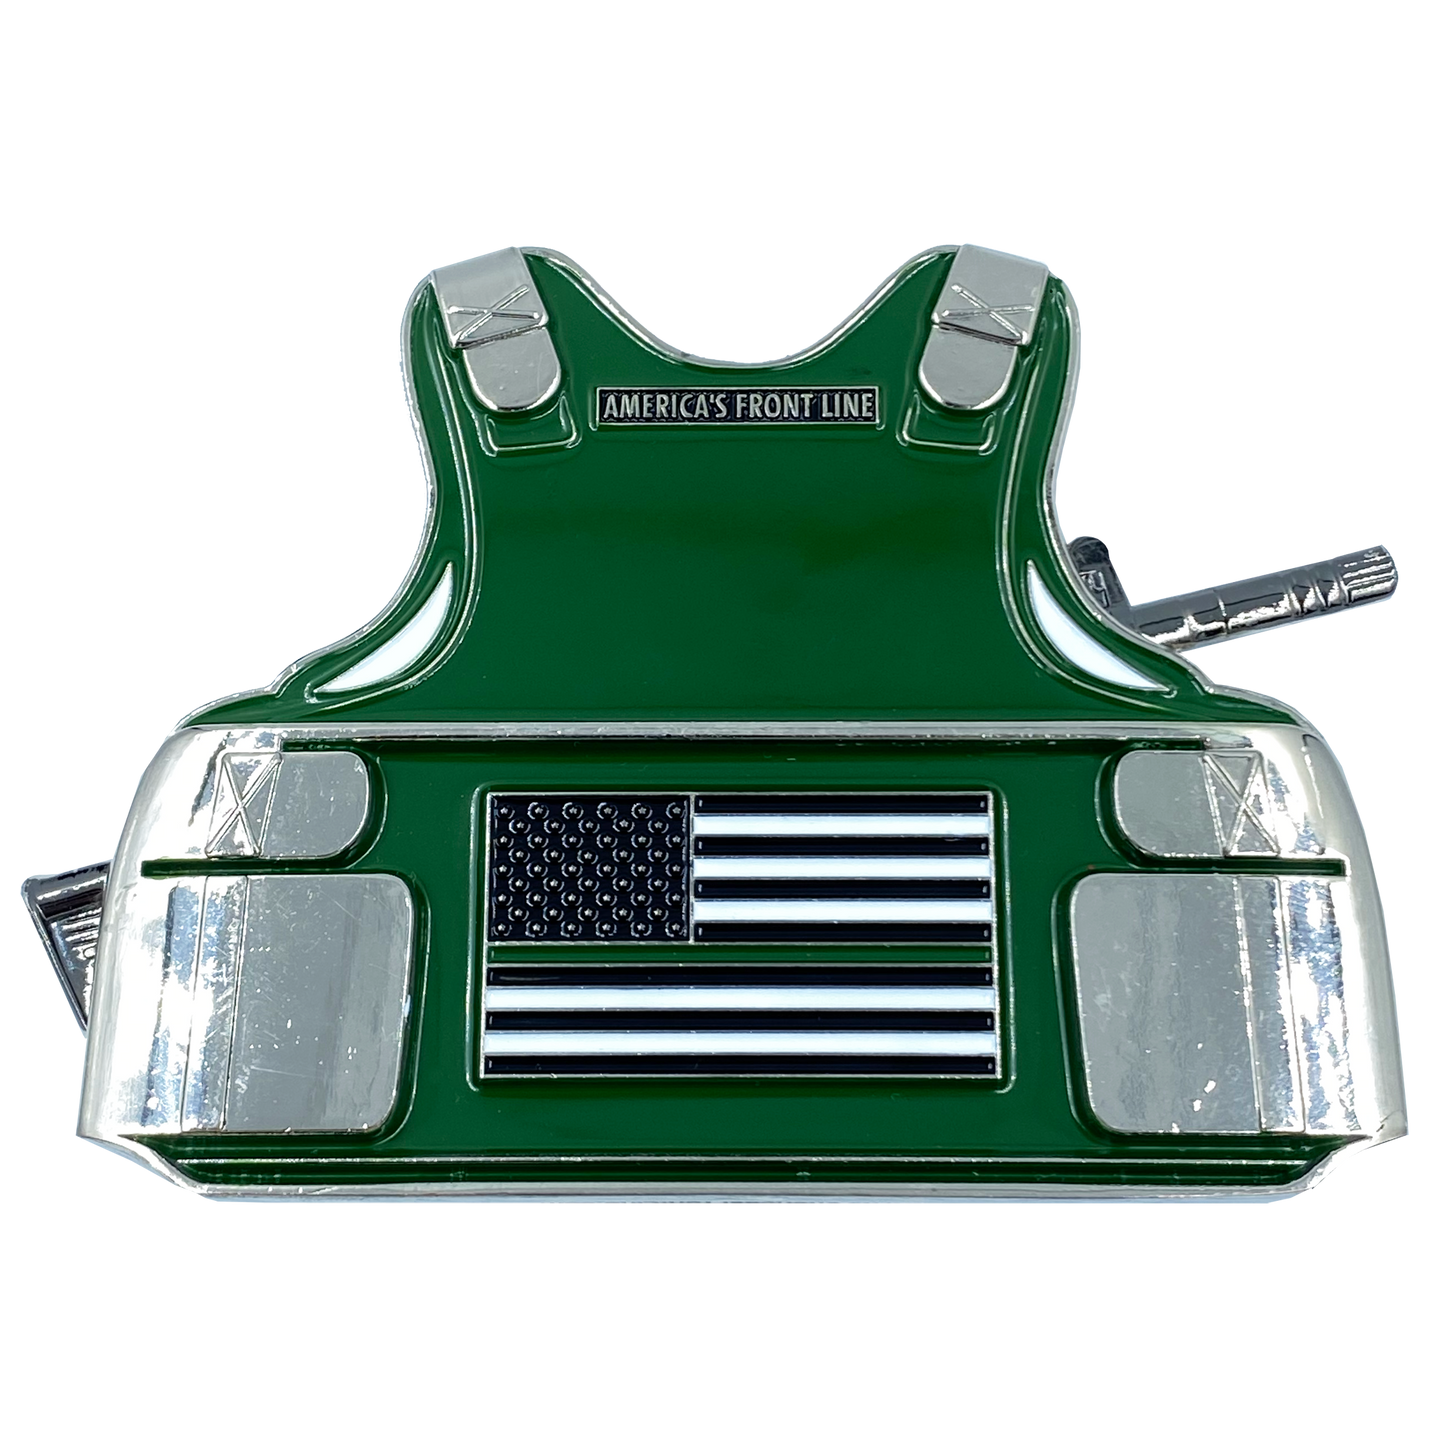 EL5-006 SHERIFF DEPUTY M4 Body Armor 3D self standing Police Challenge Coin Sheriff's Department Thin Green Line